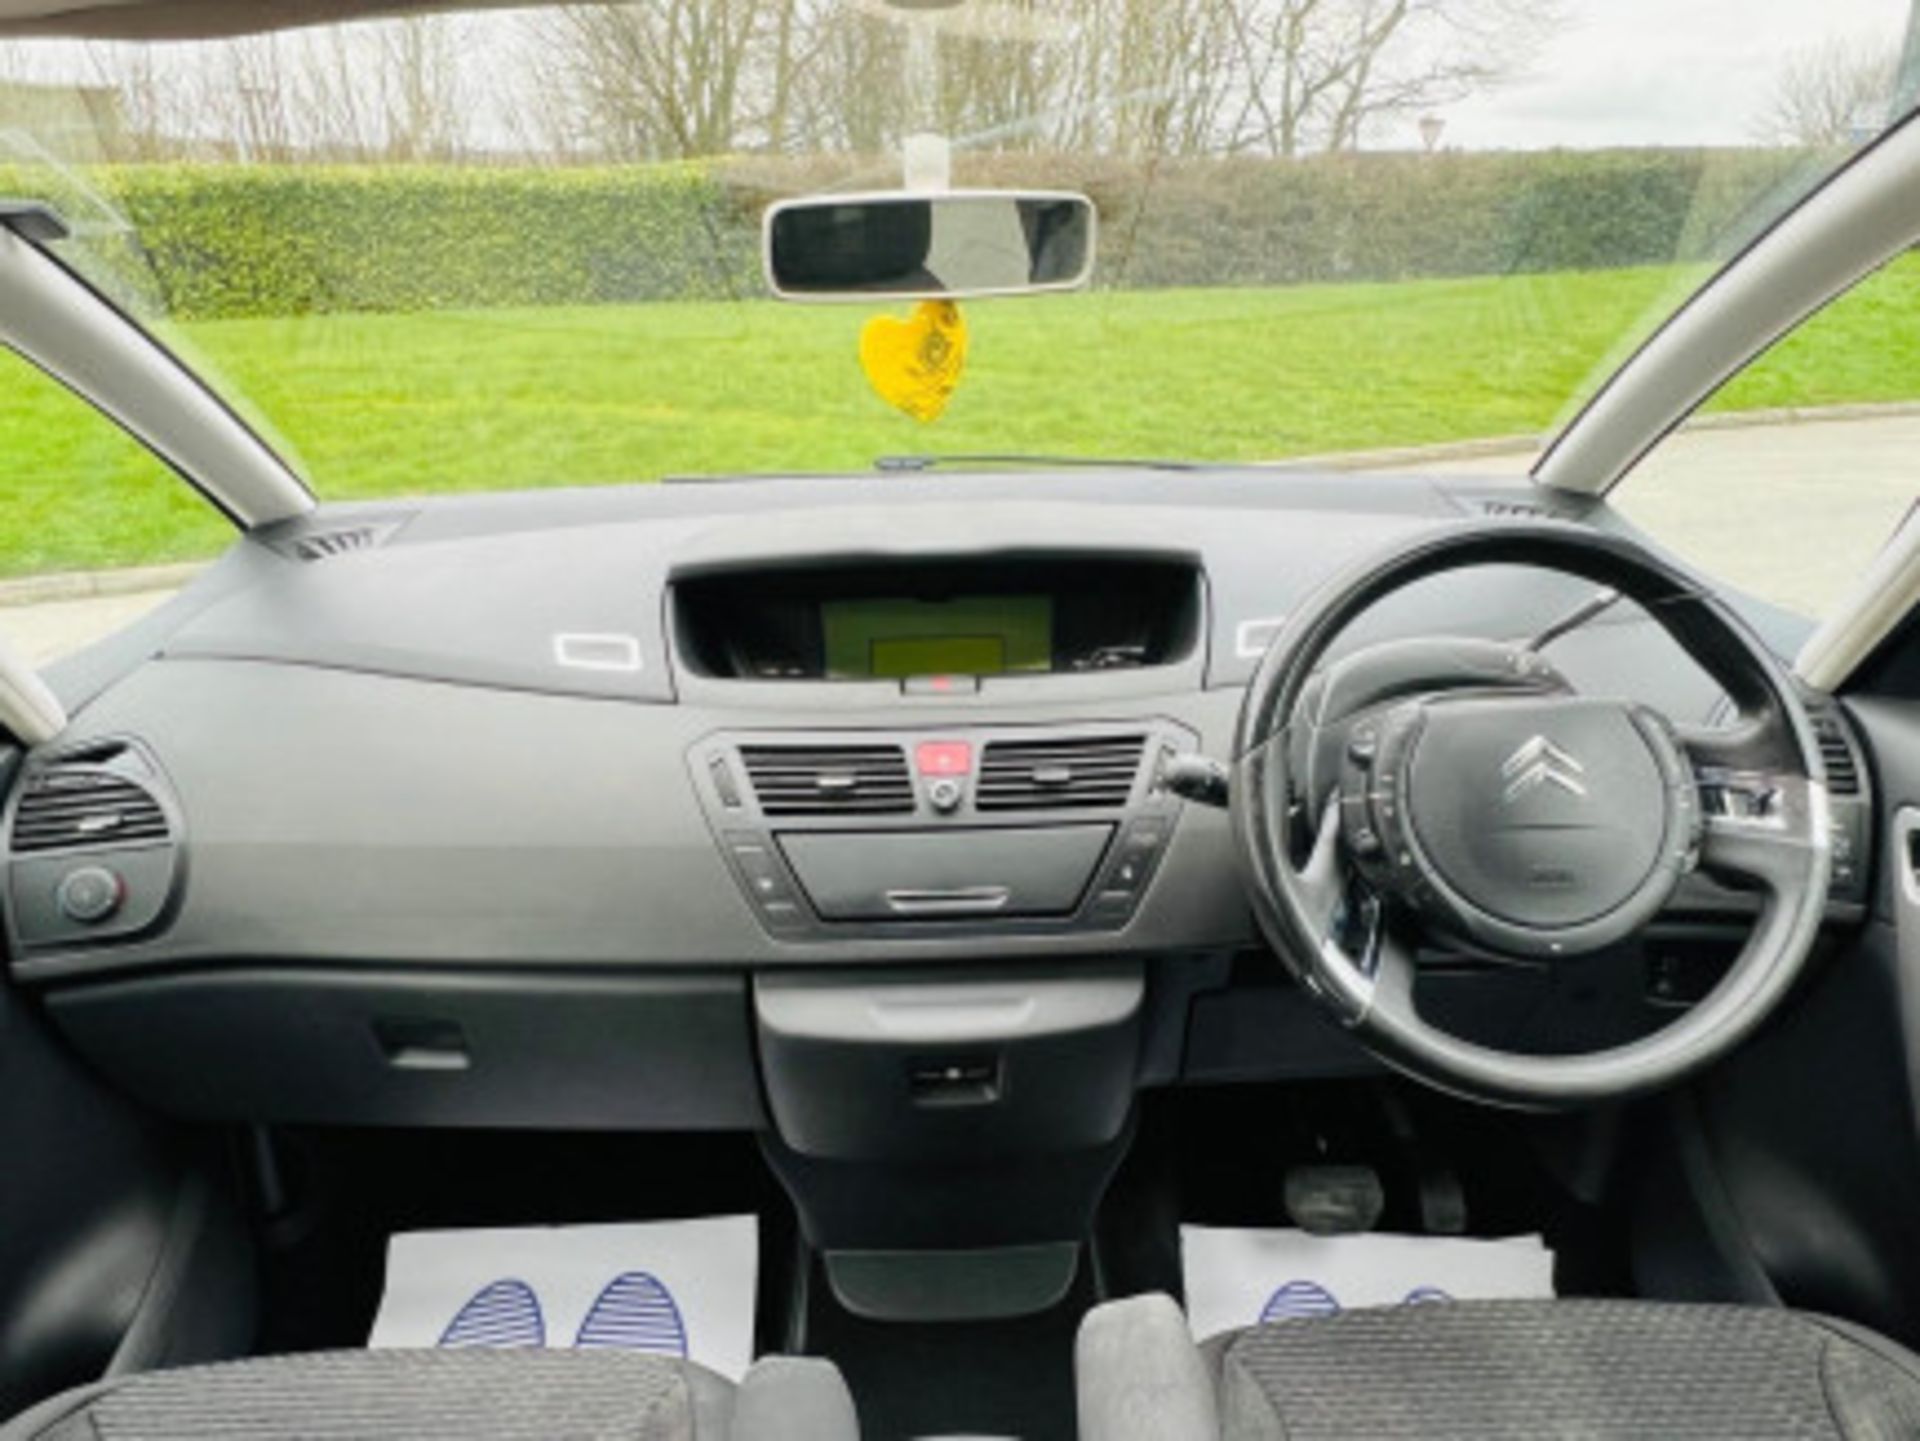 2009 CITROEN C4 PICASSO 1.6 HDI VTR+ EGS6 5DR >>--NO VAT ON HAMMER--<< - Image 16 of 123